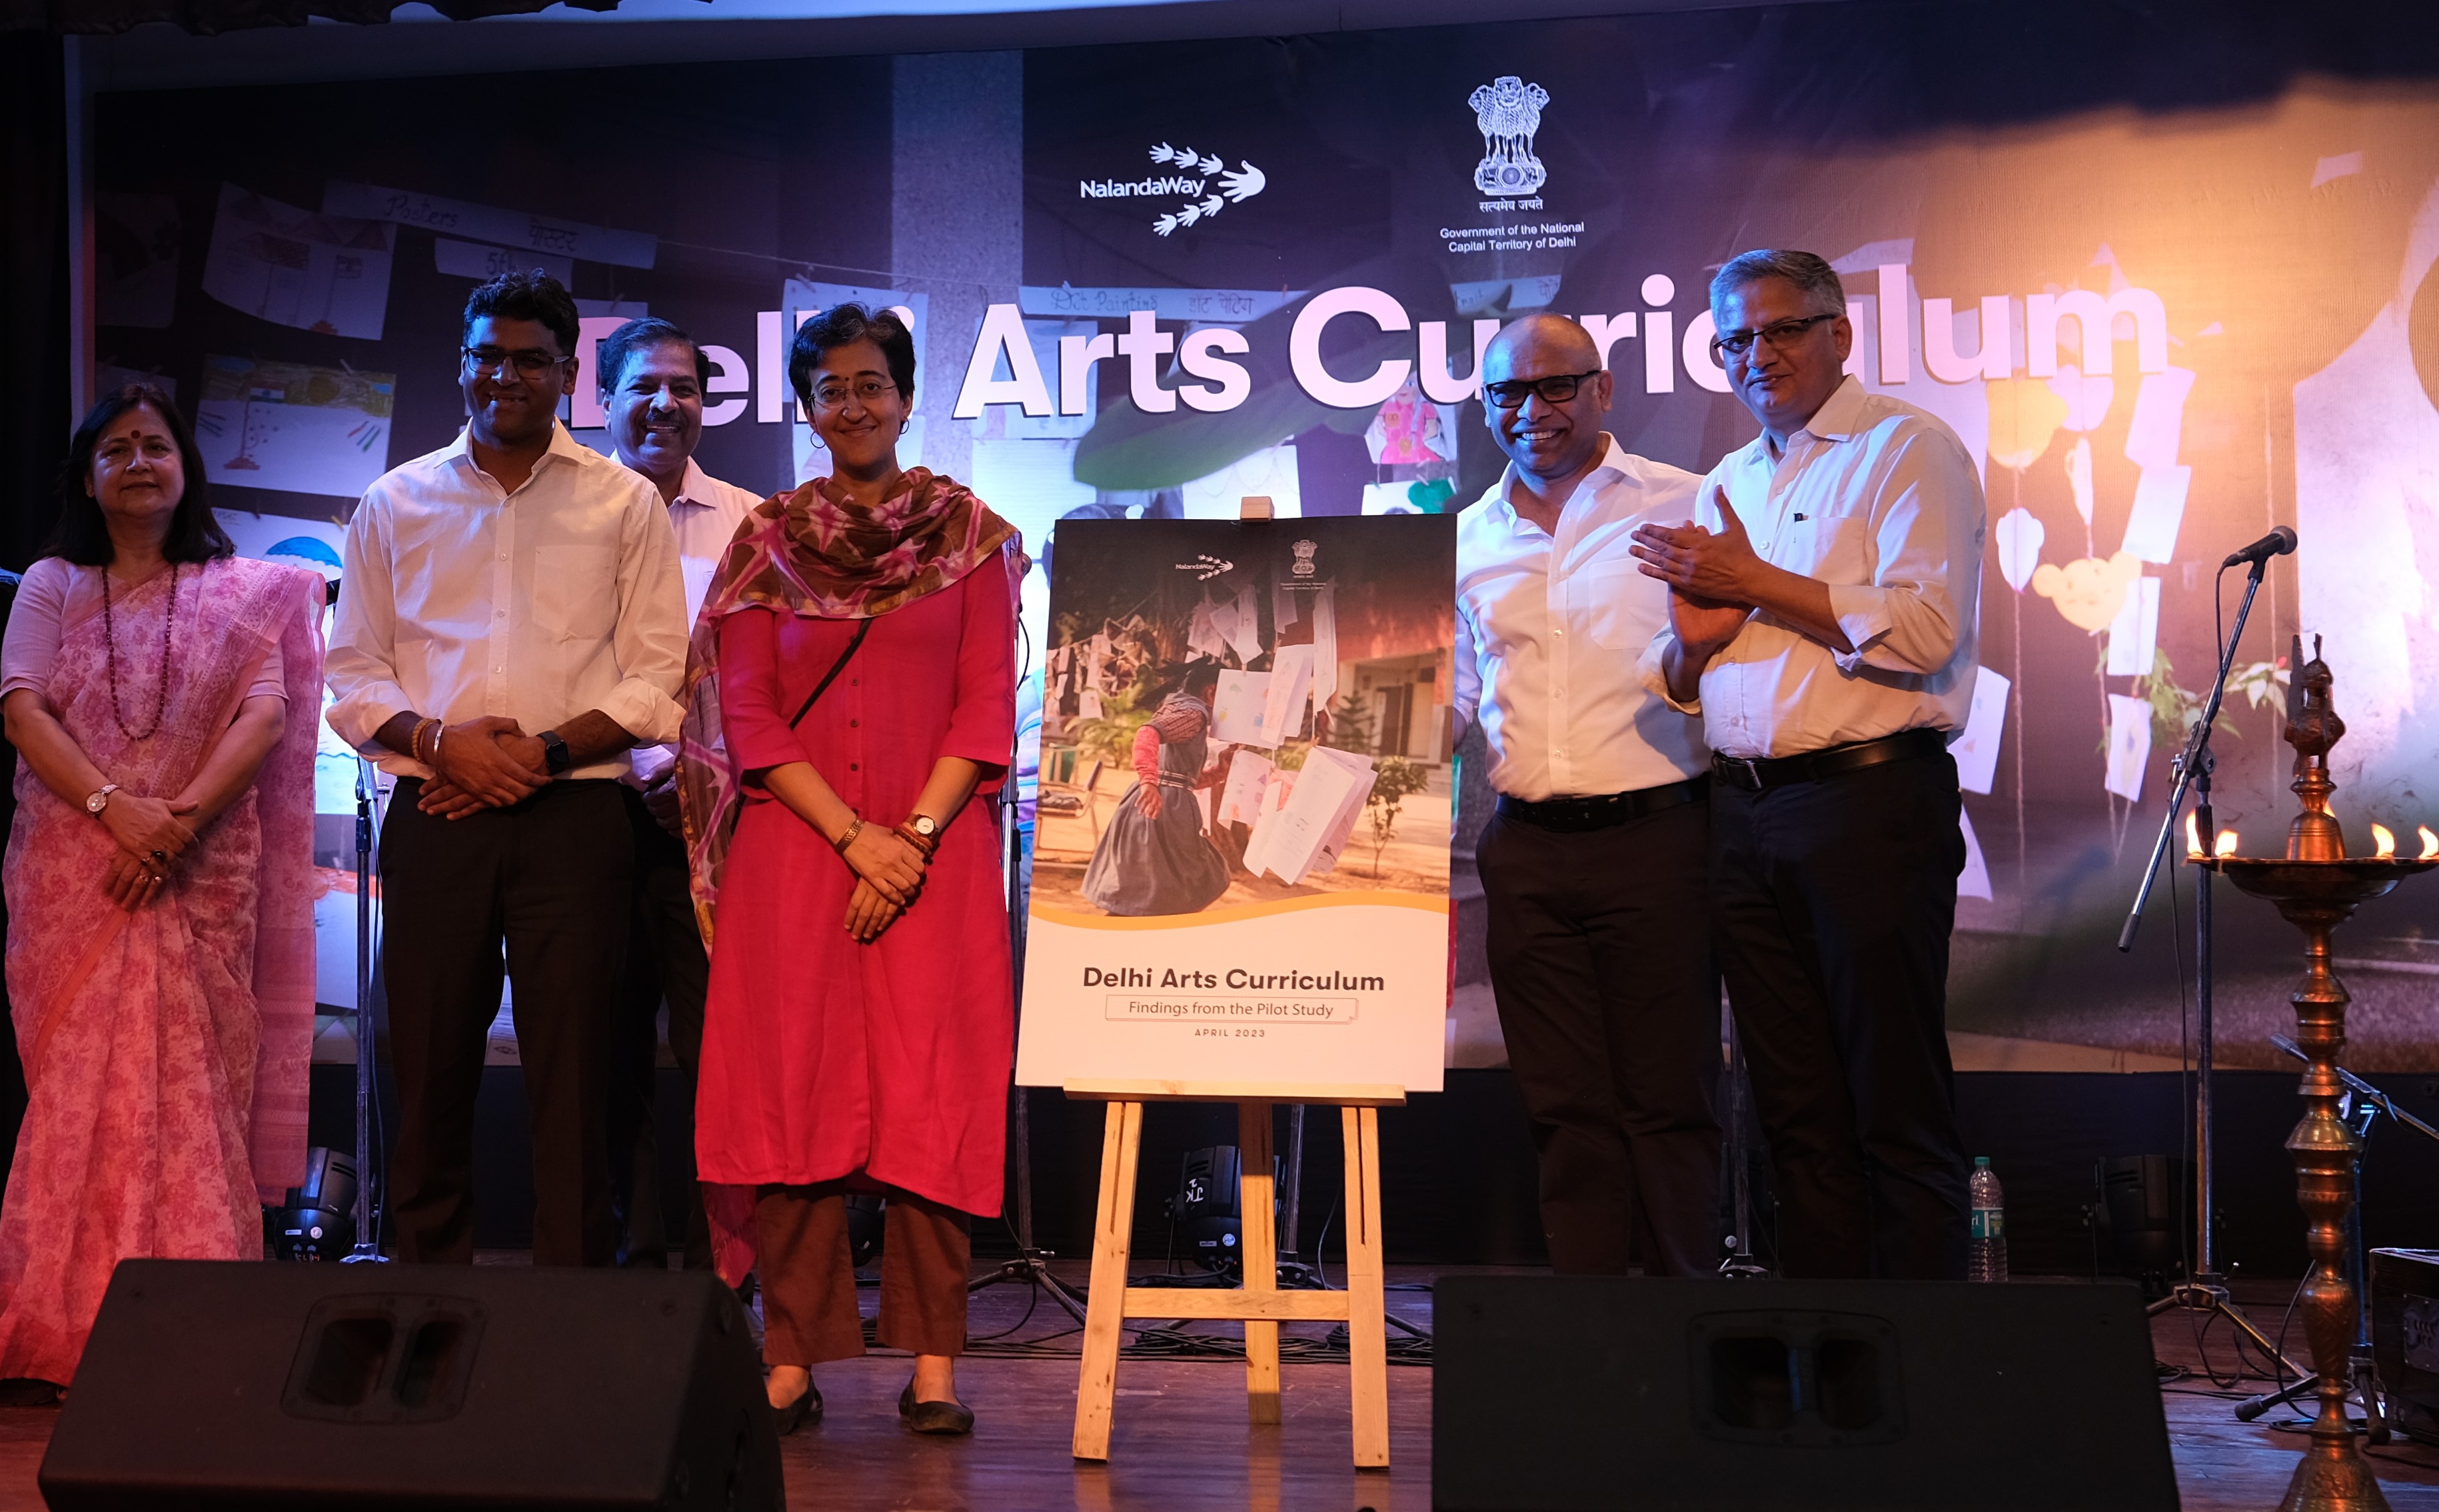 Delhi Education Minister launched Report on Arts Curriculum by NalandaWay Foundation for Students from Underserved Communities